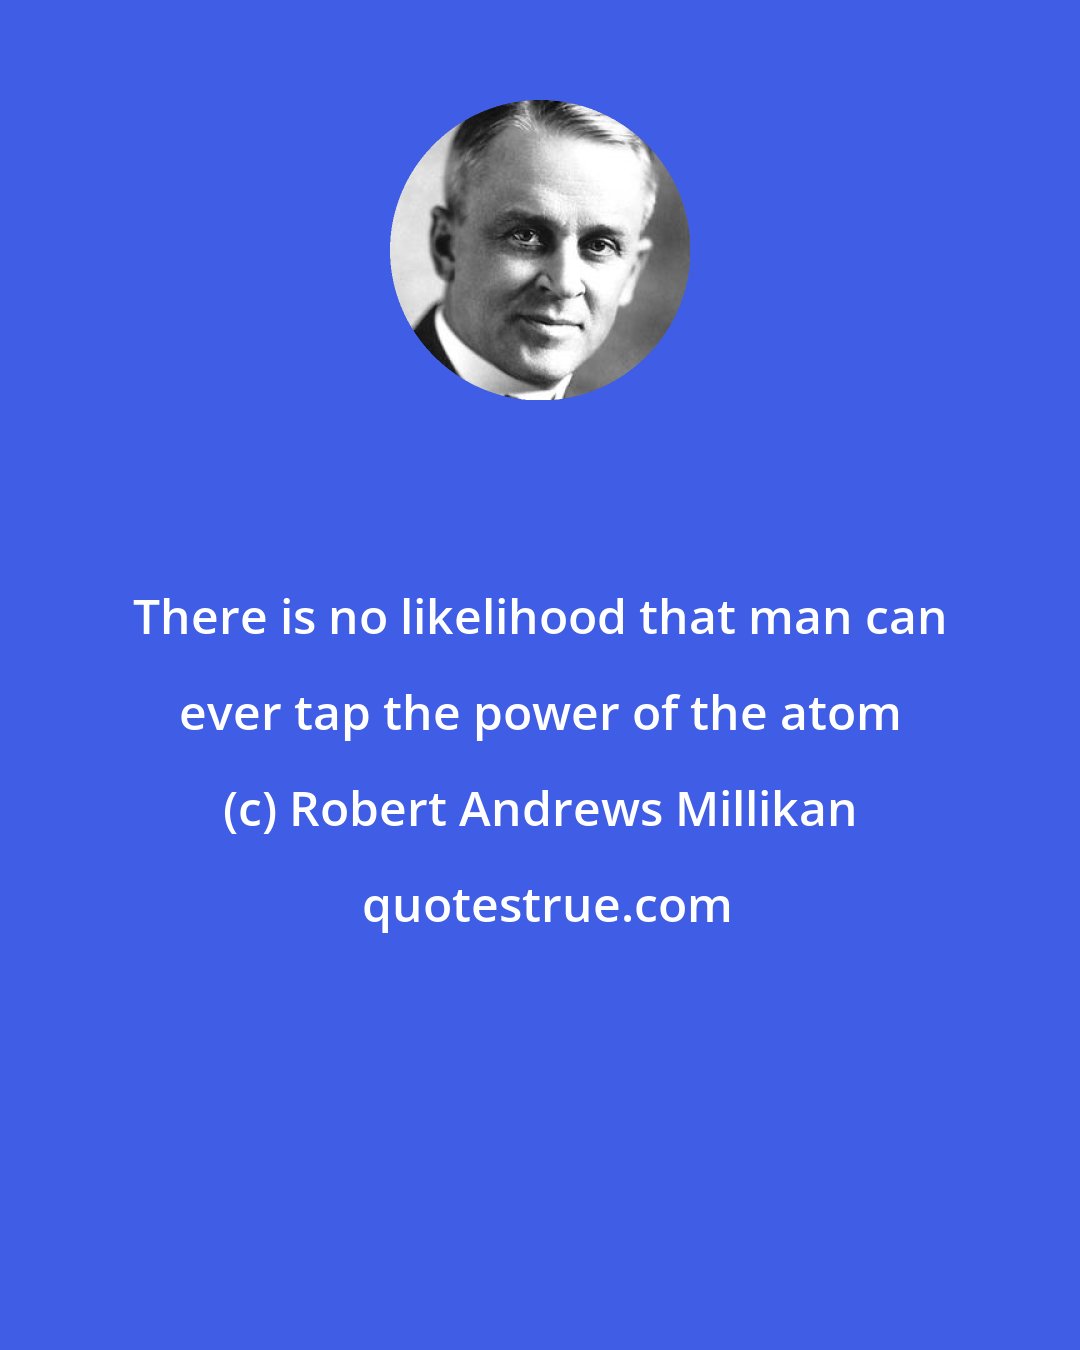 Robert Andrews Millikan: There is no likelihood that man can ever tap the power of the atom